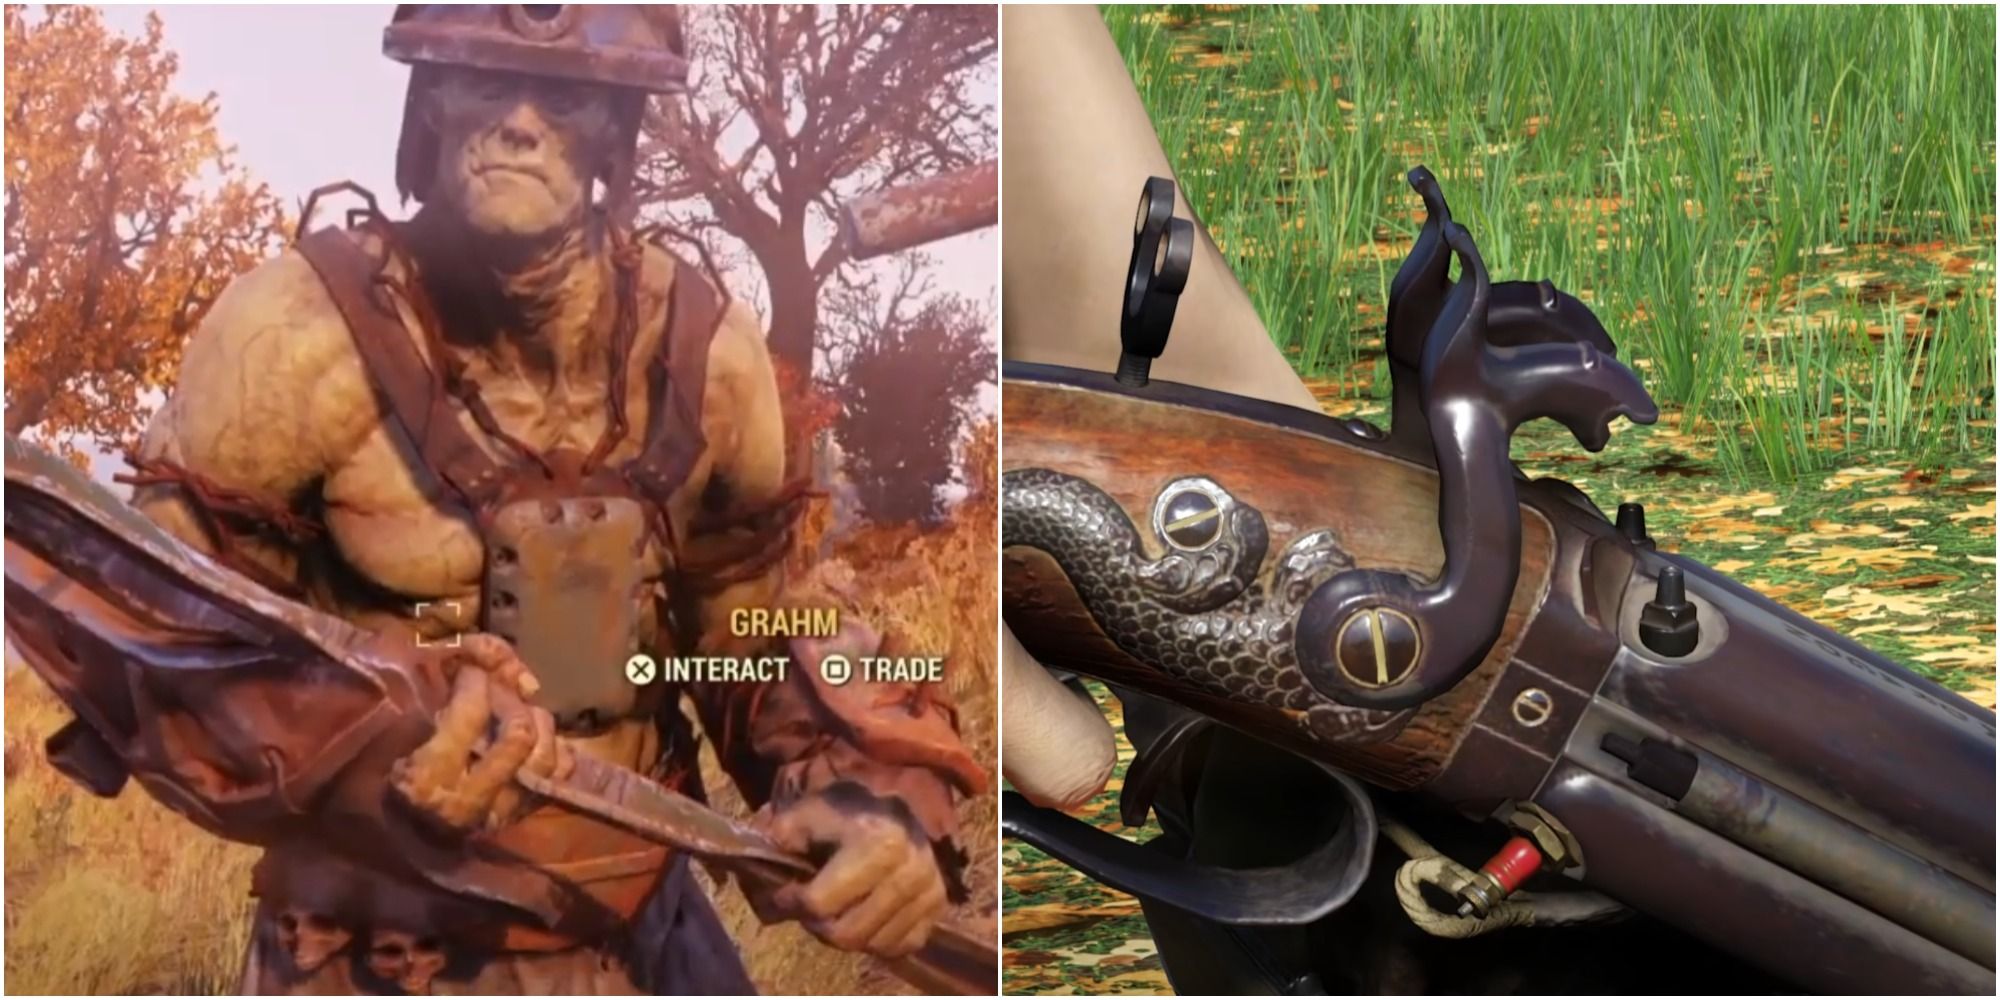 Jardines reposo Radioactivo How To Get The Dragon Four-Barreled Rifle In Fallout 76